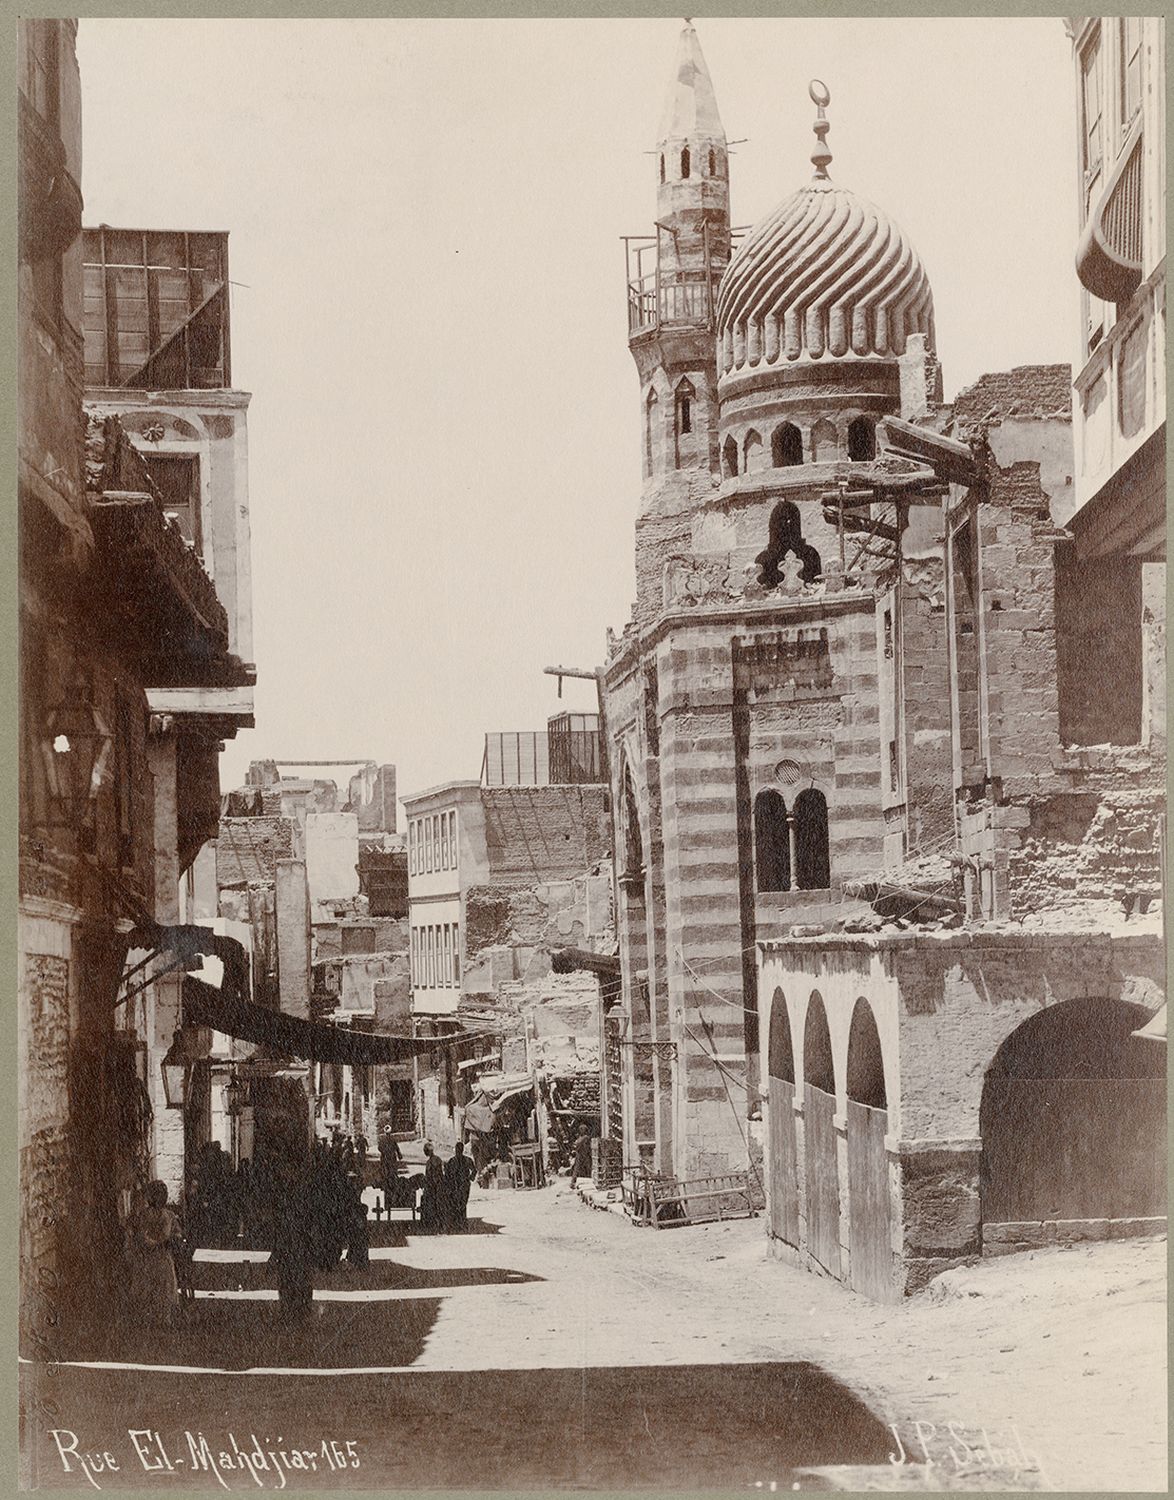 View along Mahjar Street in Cairo, Egypt. The Mosque of Amir Aytmish al-Bajasi is visible at right.